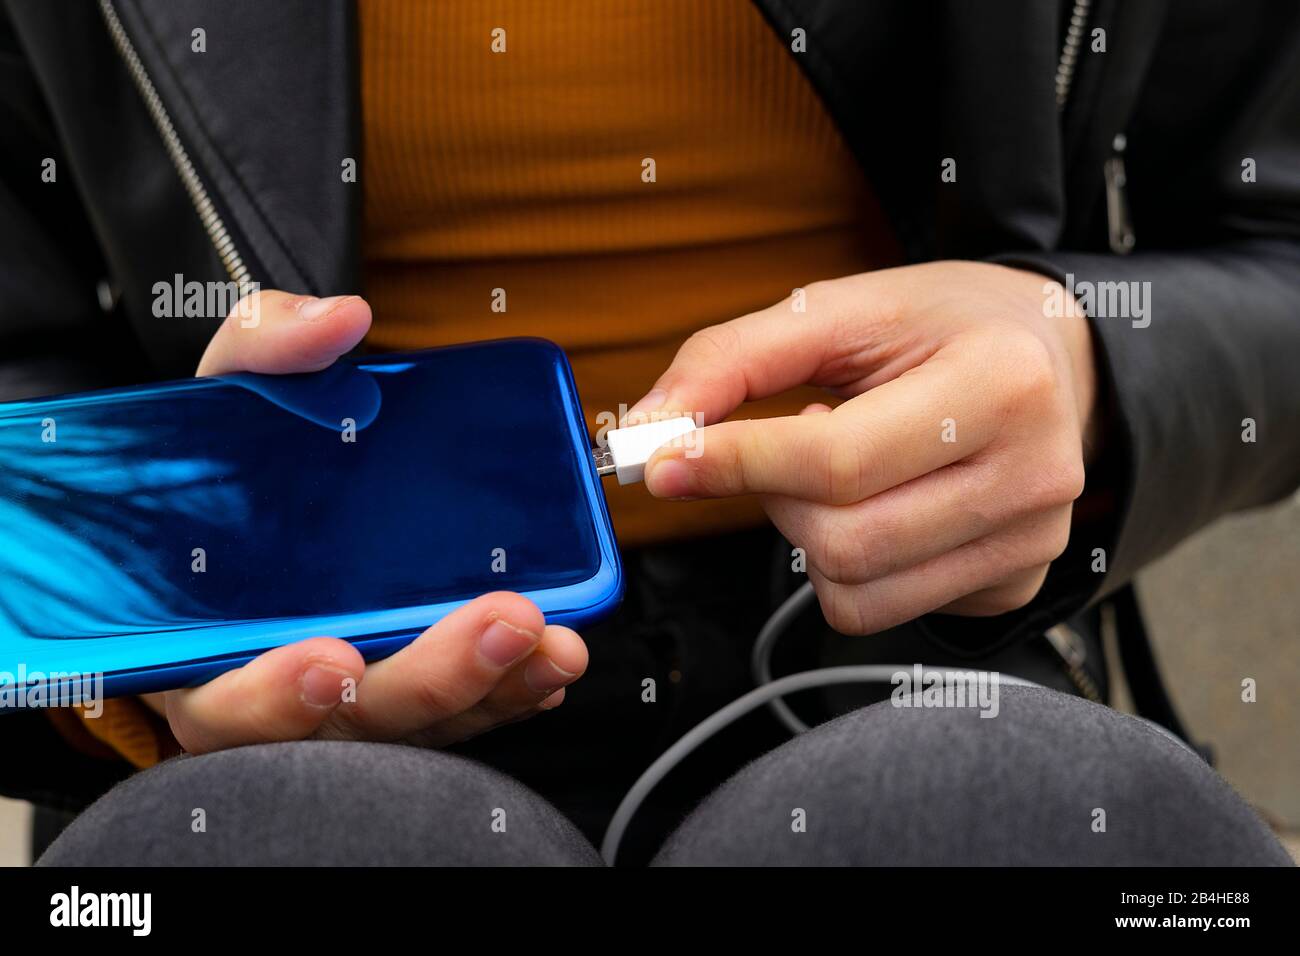 Hand connecting Micro USB cable to the mobile. Concept of charging the mobile. Stock Photo